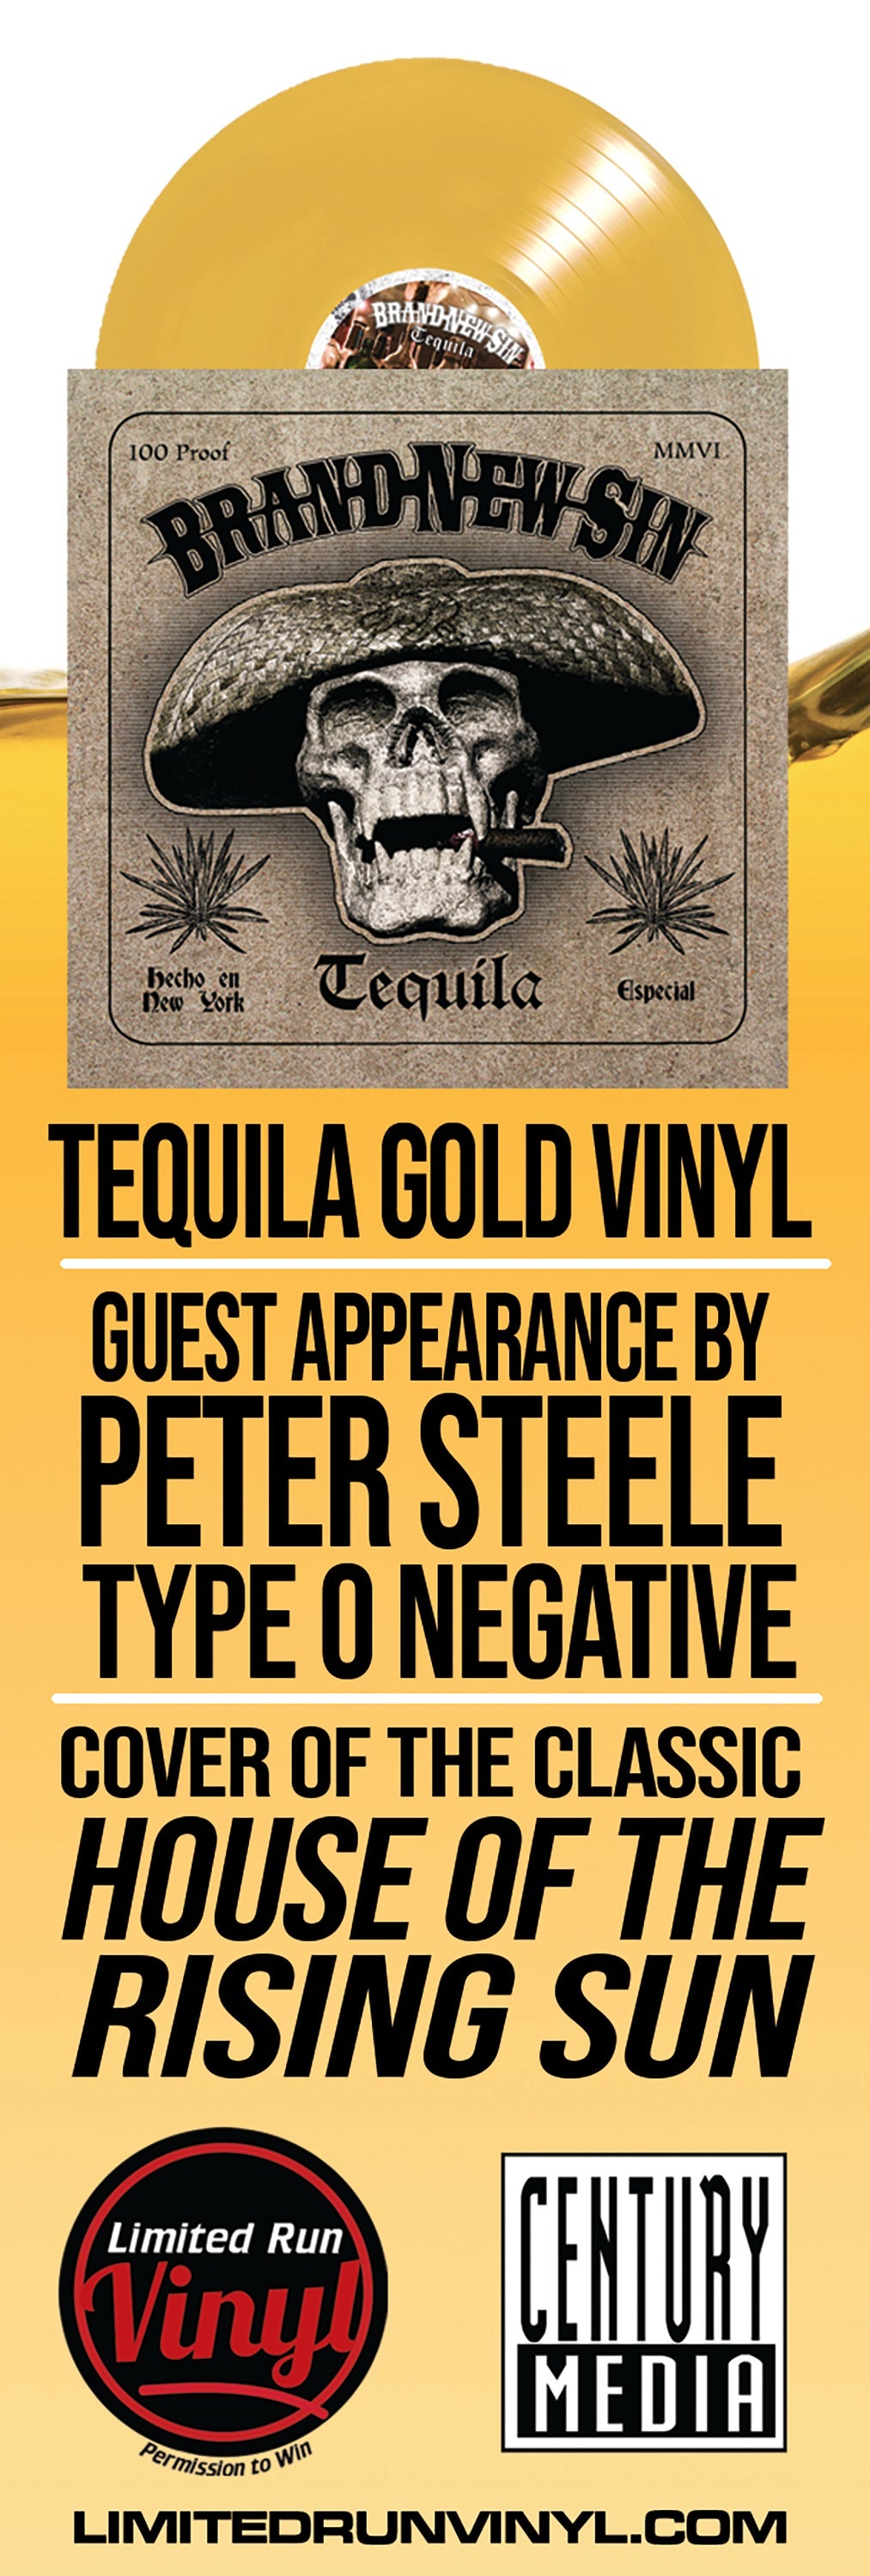 BRAND NEW SIN - TEQUILA (*NEW-TEQUILA GOLD-VINYL, 2023, Brutal Planet) 1st time ever on vinyl! For fans of bluesy hard rock/metal!